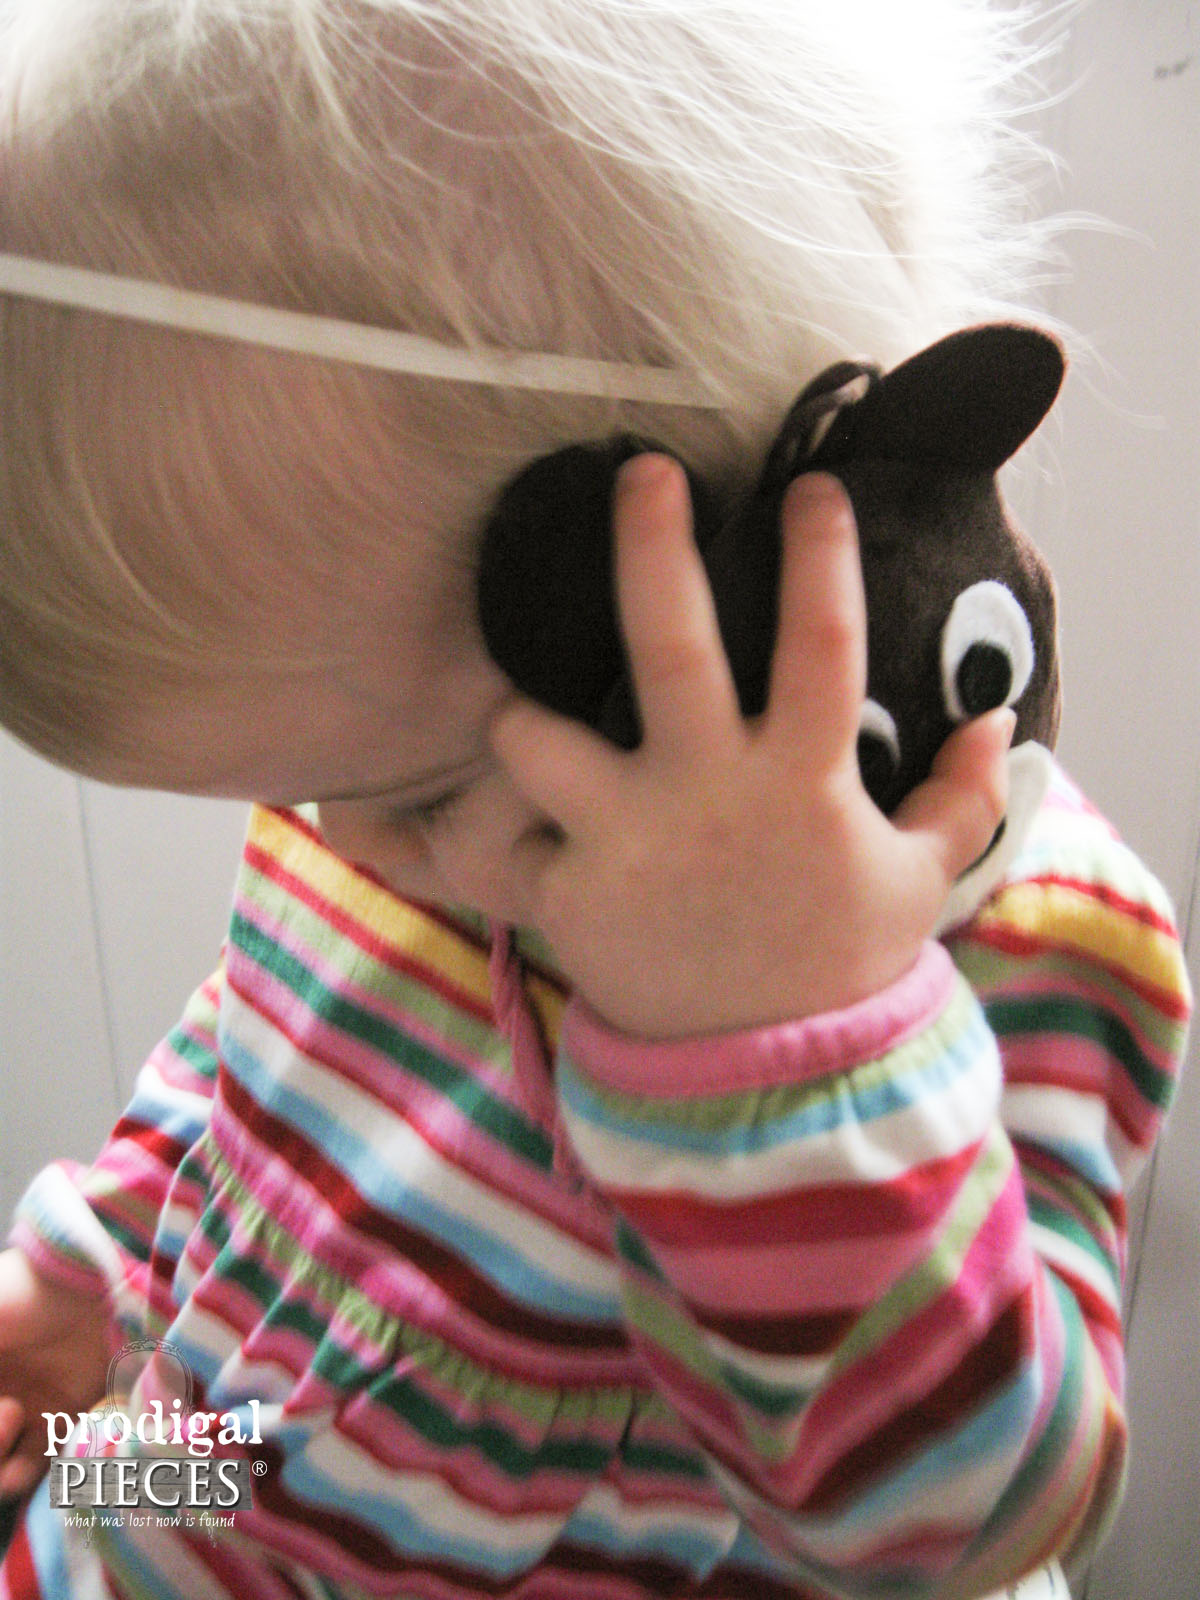 Toddler Girl with Boo-Boo Bear by Prodigal Pieces | prodigalpieces.com #prodigalpieces